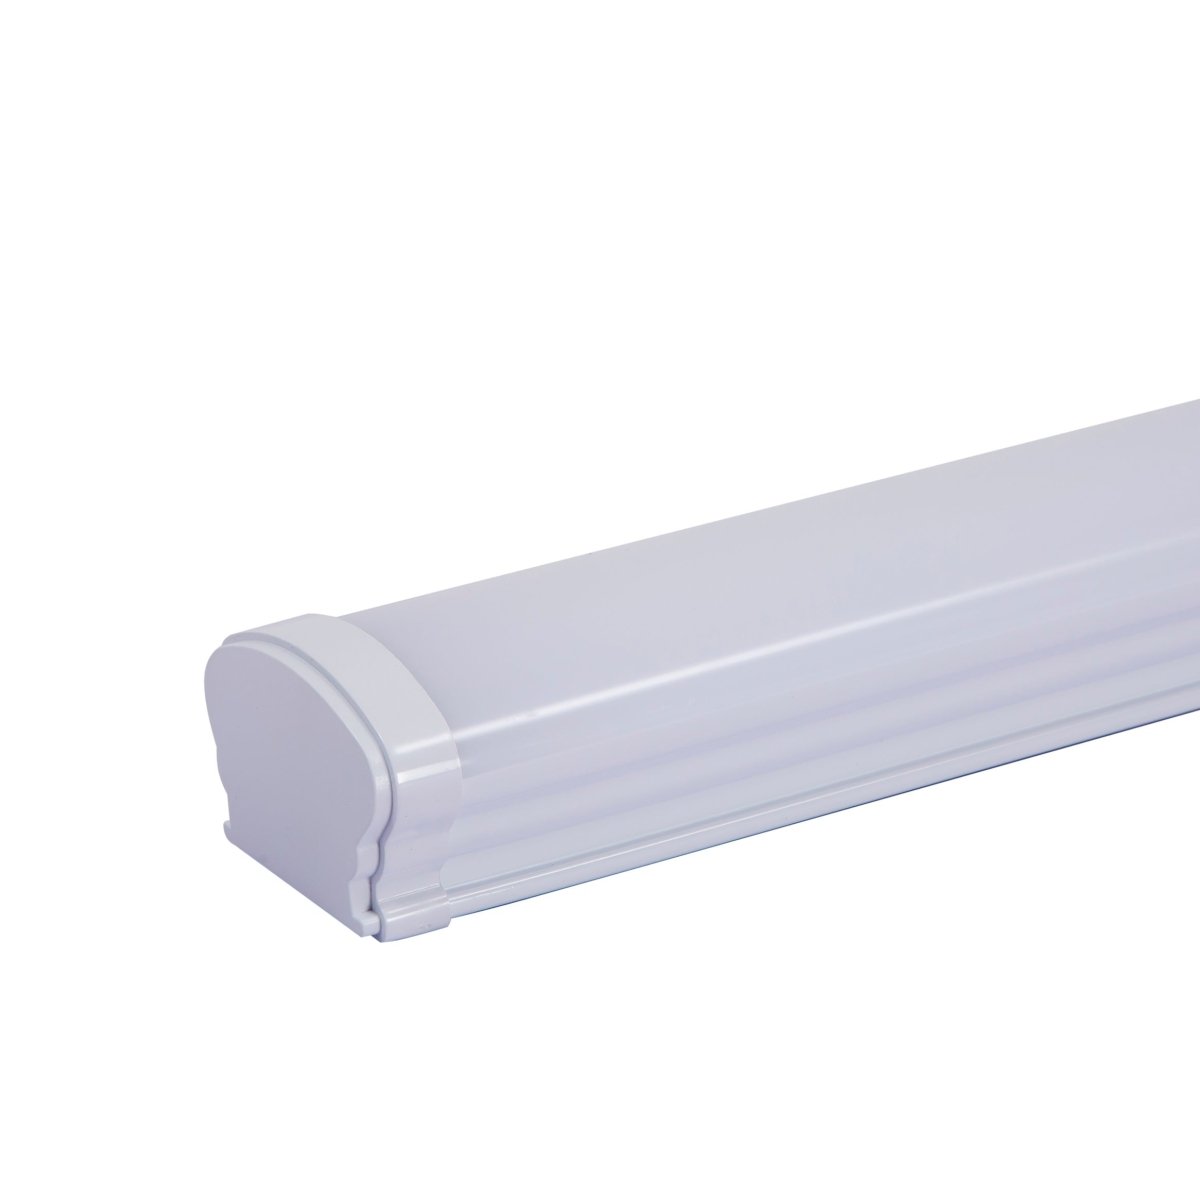 Main image of LED Tri-proof Batten Linear Fitting 48W 6500K Cool Daylight IP65 120cm 4ft